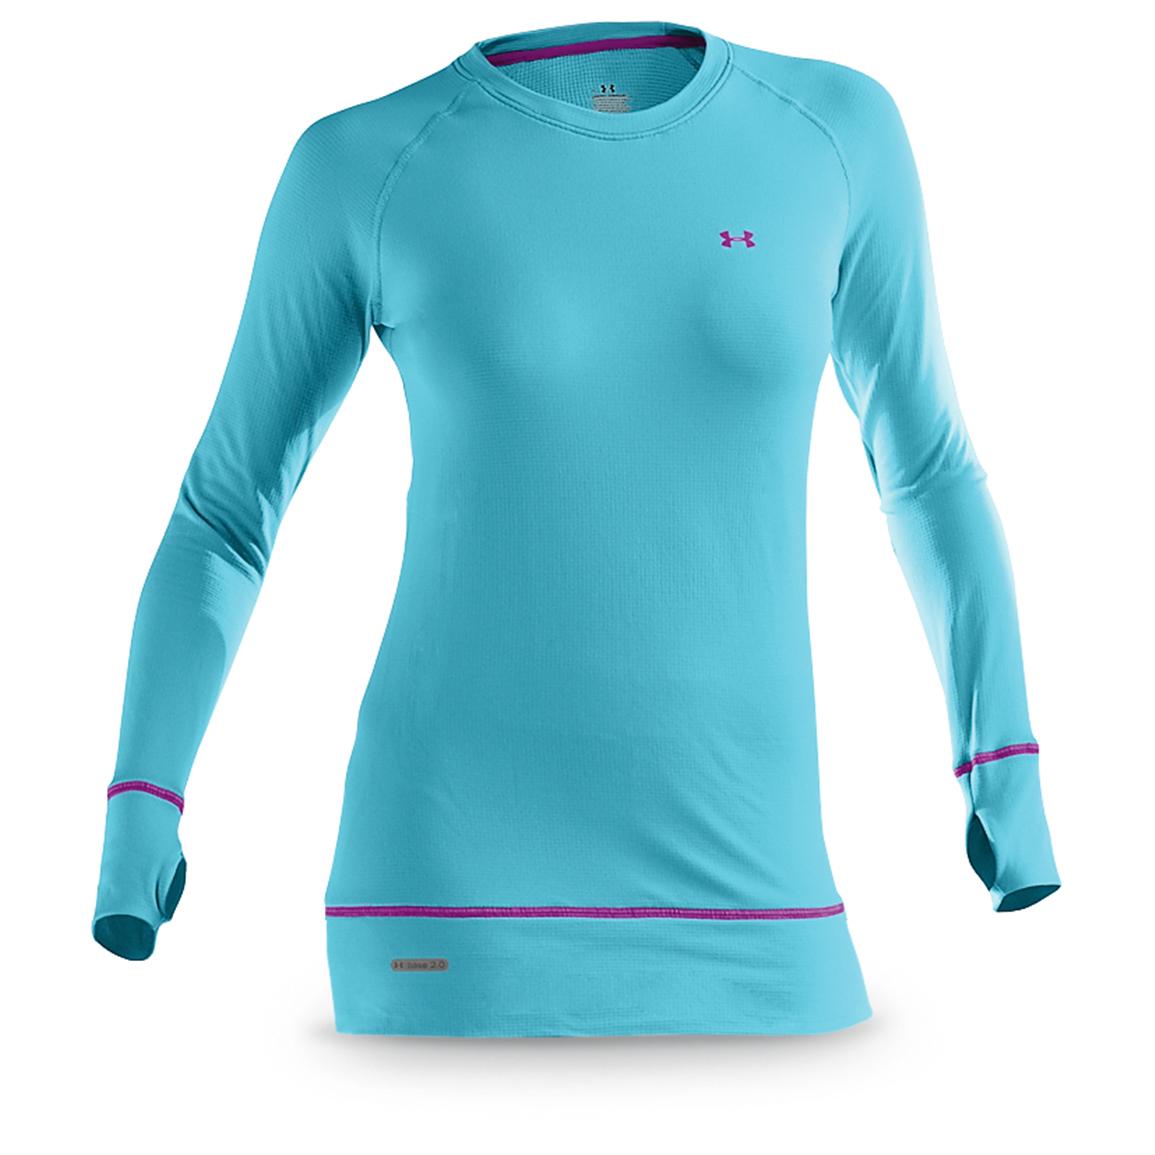 sky blue under armour base layer